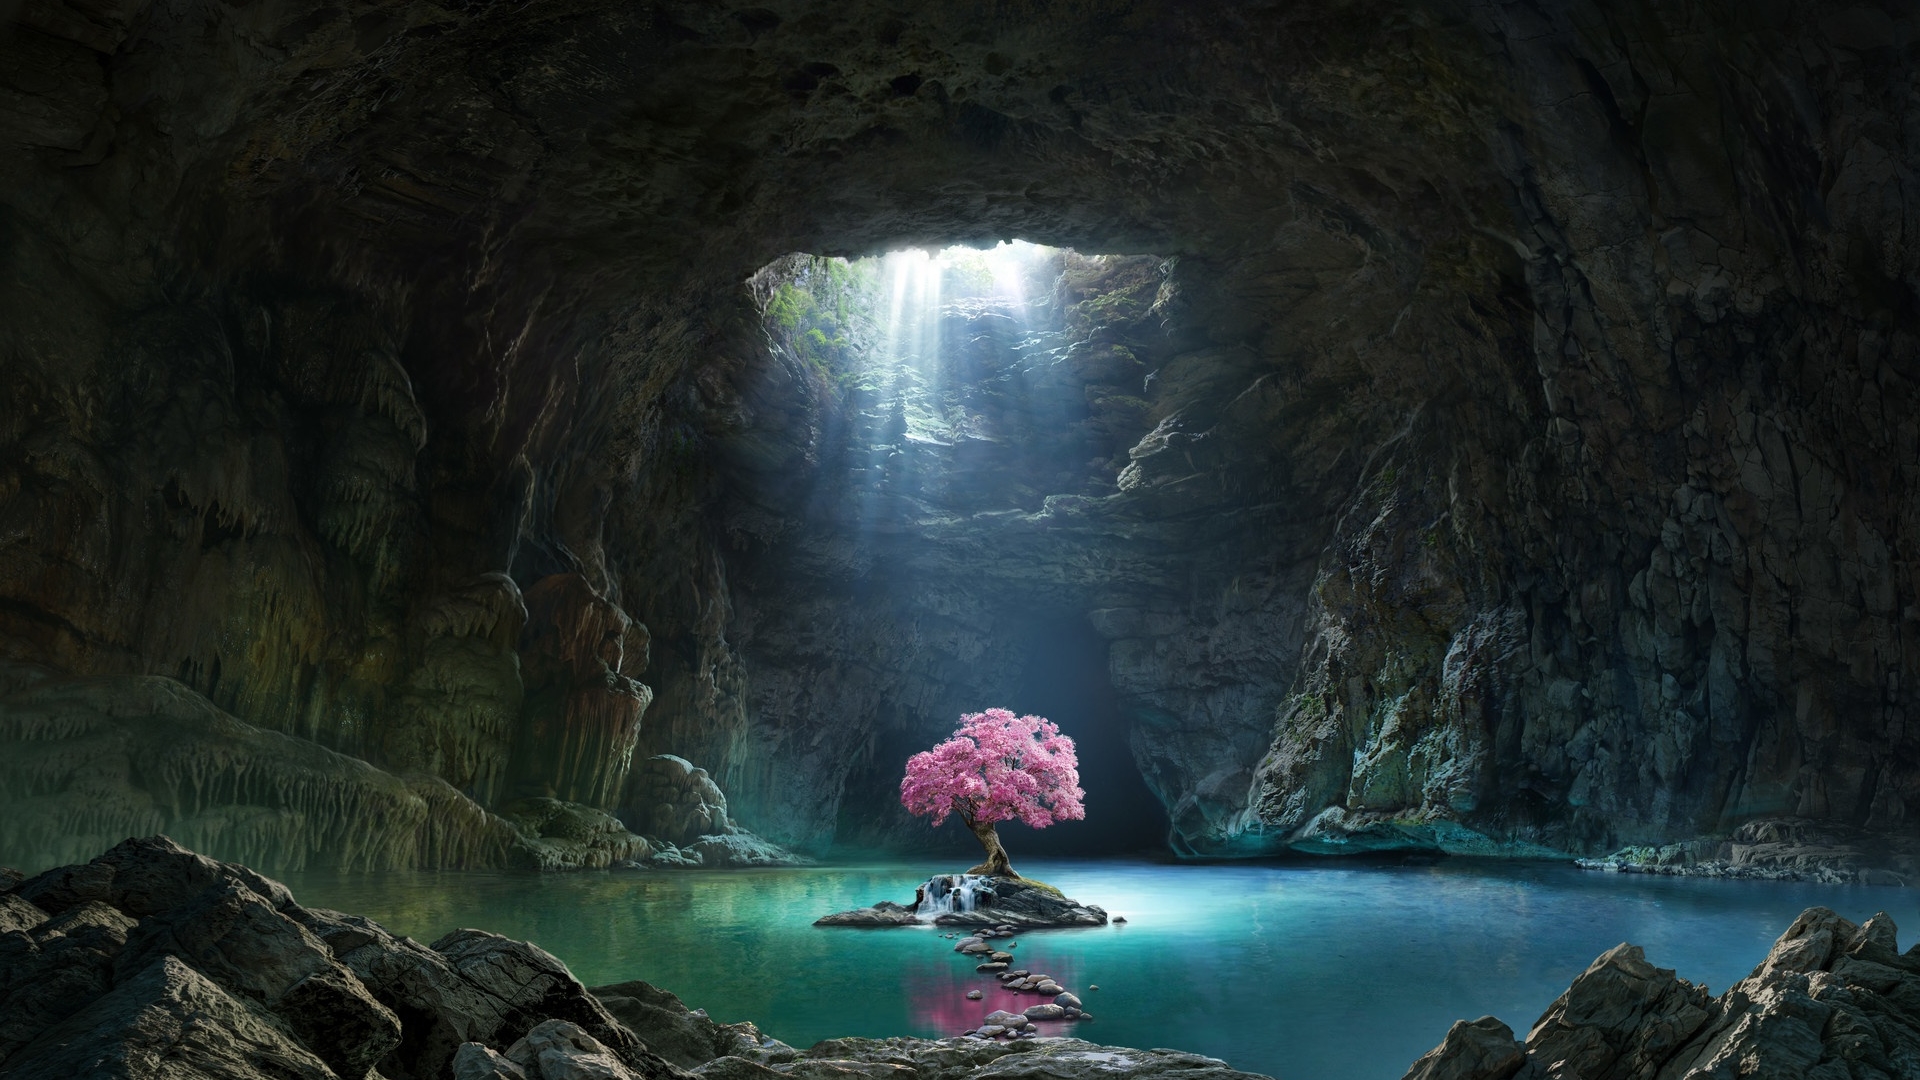 General 1920x1080 nature landscape trees water cave rocks lake stones sun rays island photo manipulation pink cherry trees reflection blossoms cherry blossom